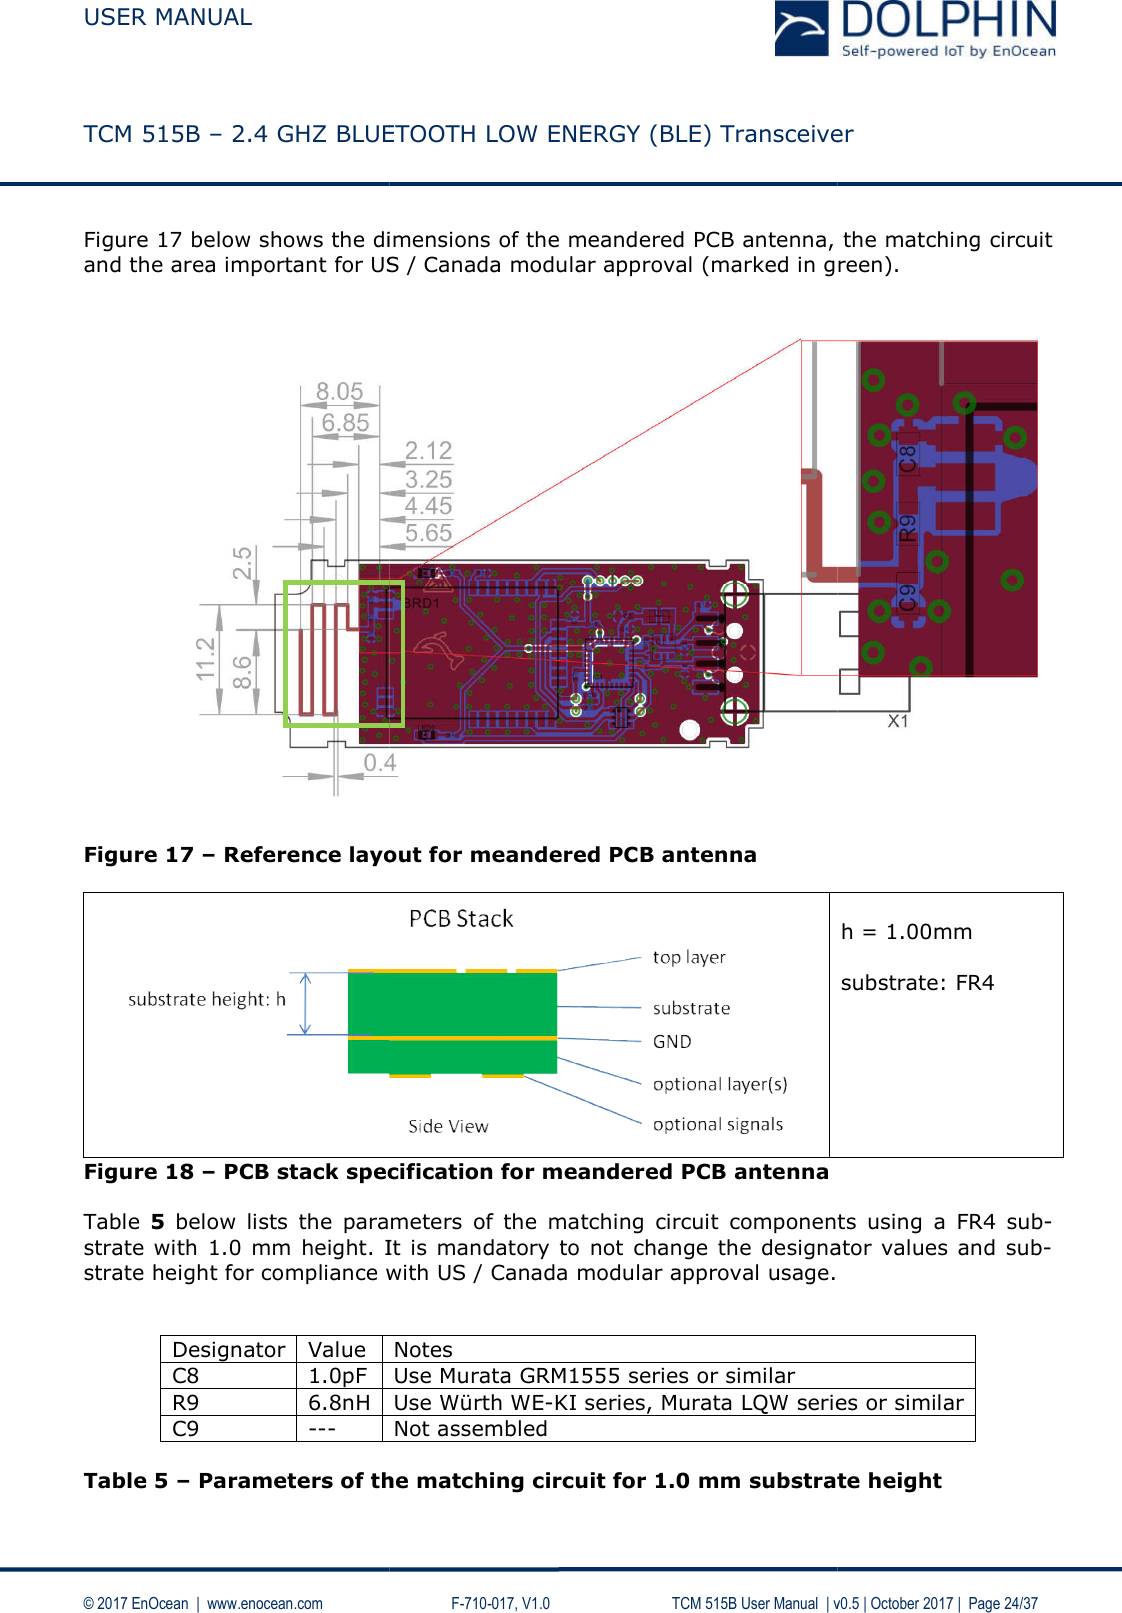  USER MANUAL    TCM 515B – 2.4 GHZ BLUETOOTH LOW ENERGY  © 2017 EnOcean  |  www.enocean.com   Figure 17 below shows the dimensions of the meandered PCB antenna, the matching circuit and the area important for US / Canada modular approval (marked in green).  Figure 17 – Reference layout for meandered PCB antenna Figure 18 – PCB stack specification for meandered PCB antenna Table  5  below  lists  the parameters  of  the strate with 1.0 mm  height. It is mandatory to not change the designator values and sustrate height for compliance with   Designator Value C8  1.0pF R9  6.8nH C9  ---  Table 5 – Parameters of the matching circuitBLUETOOTH LOW ENERGY (BLE) Transceiver F-710-017, V1.0        TCM 515B User Manual  | vthe dimensions of the meandered PCB antenna, the matching circuit and the area important for US / Canada modular approval (marked in green).Reference layout for meandered PCB antenna  PCB stack specification for meandered PCB antenna parameters  of  the matching  circuit components It is mandatory to not change the designator values and sustrate height for compliance with US / Canada modular approval usage. Notes Use Murata GRM1555 series or similar Use Würth WE-KI series, Murata LQW series or similarNot assembled of the matching circuit for 1.0 mm substrate heightTransceiver User Manual  | v0.5 | October 2017 |  Page 24/37 the dimensions of the meandered PCB antenna, the matching circuit and the area important for US / Canada modular approval (marked in green).   h = 1.00mm   substrate: FR4          components using  a  FR4  sub-It is mandatory to not change the designator values and sub-US / Canada modular approval usage.  KI series, Murata LQW series or similar for 1.0 mm substrate height 